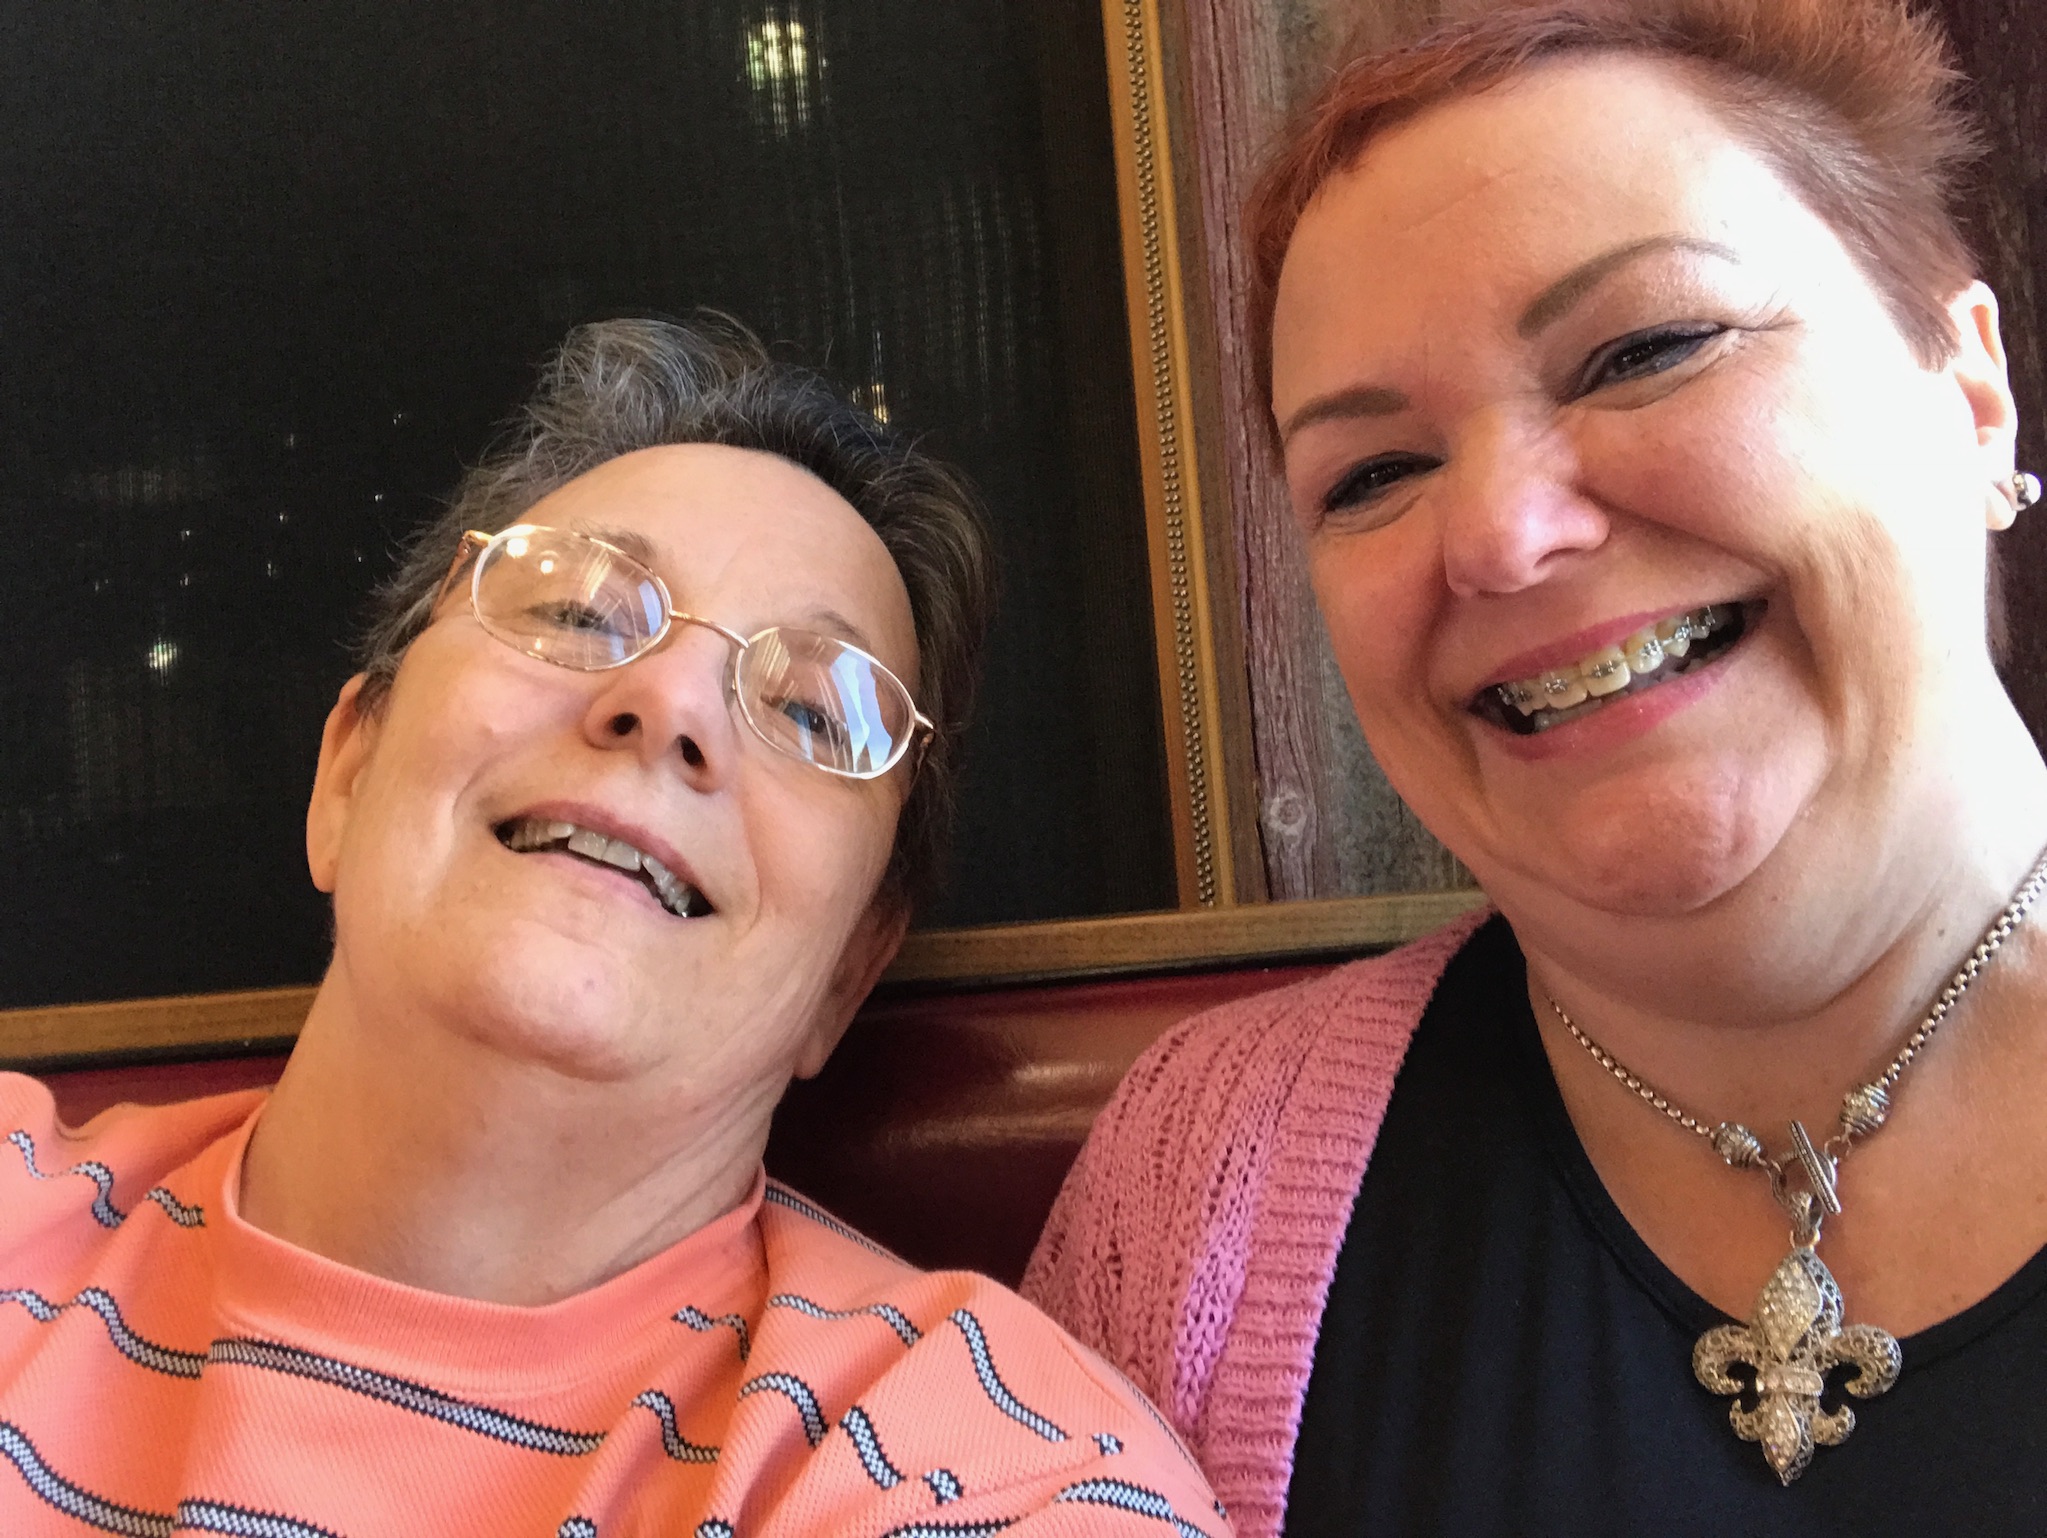 Lori (right) and me after a good lunch and fun time at lunch today.  Photo taken by and the property of FourWalls.